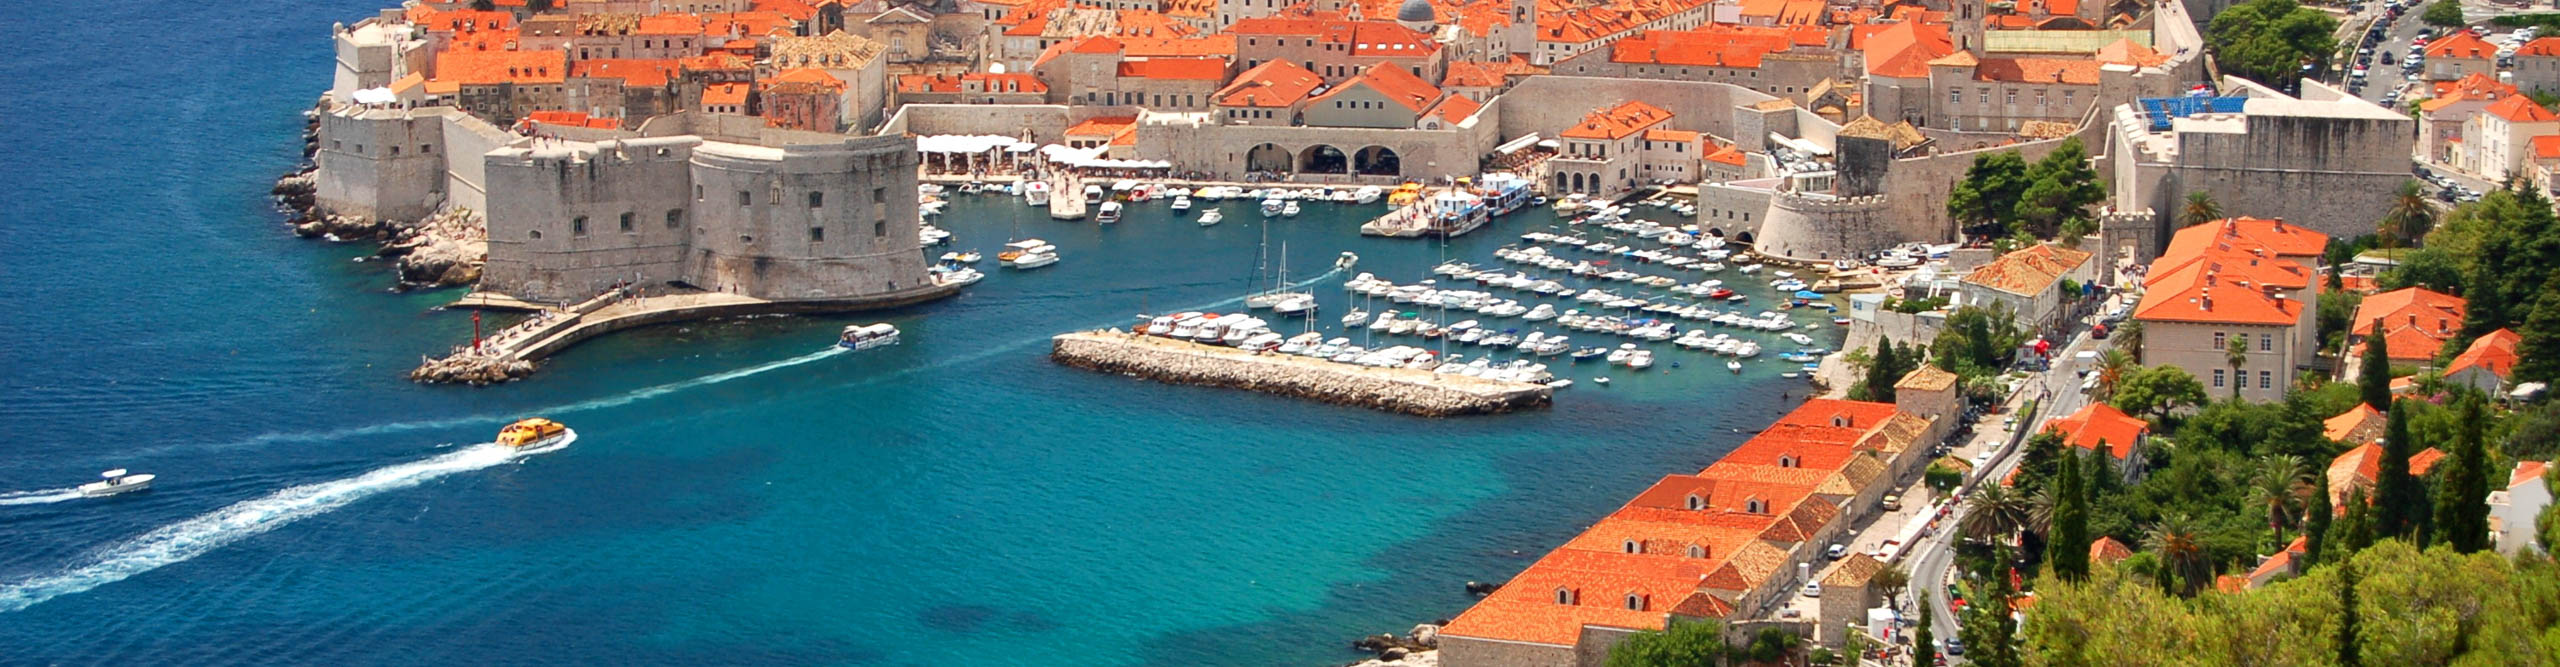 Split to Dubrovnik Tours with Intrepid Travel